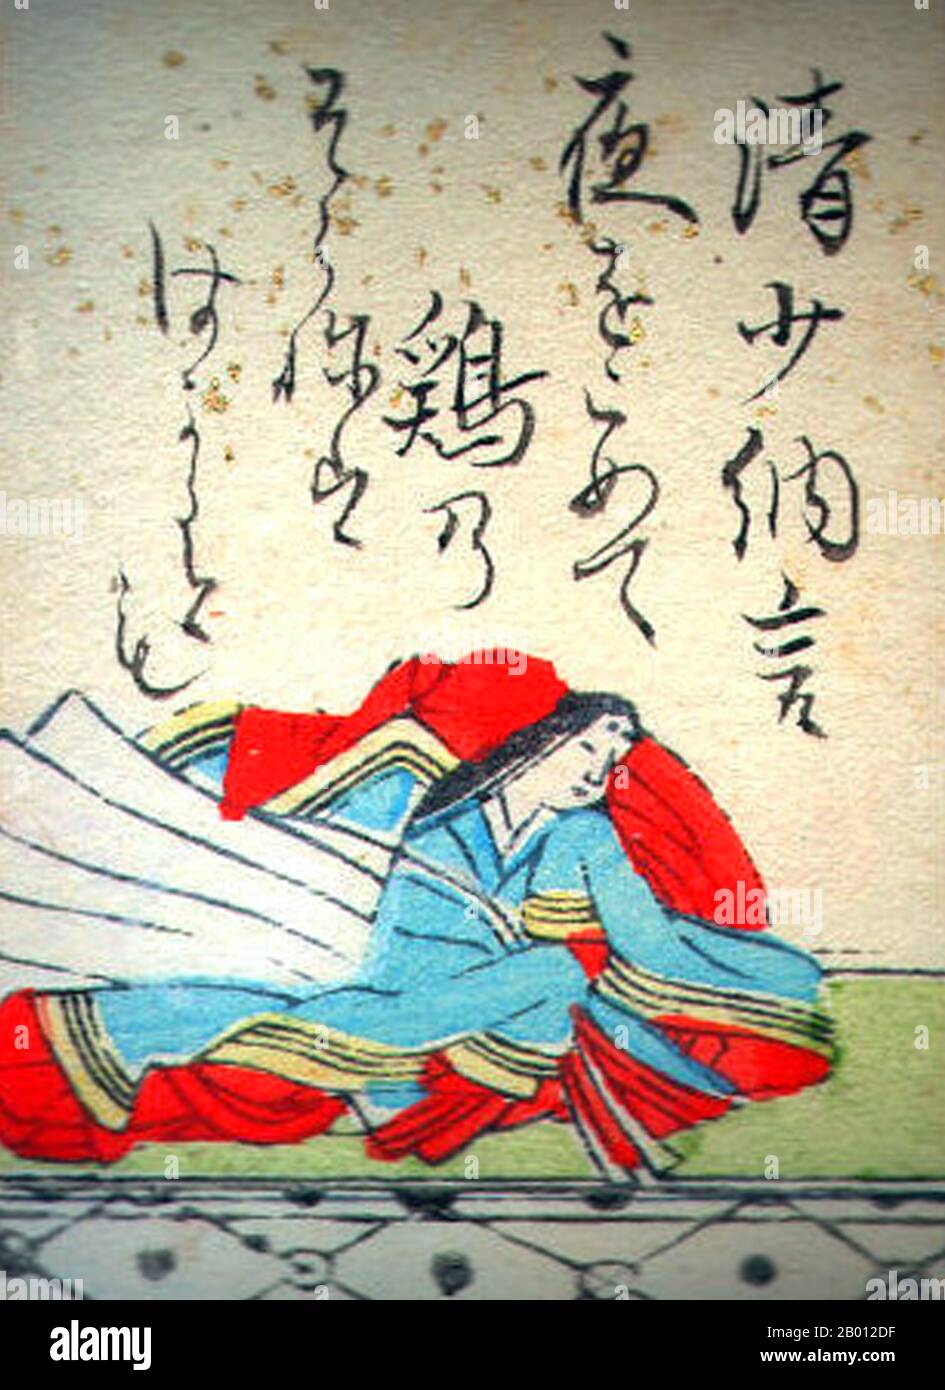 Japan: Sei Shonagon (c. 966-1017/1025) Japanese author and court lady of the middle Heian Era. Portrait from an uta-garuta playing card for 'Hyakunin Isshu' (anthology of poems), Edo Period (1600-1868).  Sei Shonagon (c. 966-1017/1025) was a Japanese author and a court lady who served the Empress Teishi (Empress Sadako) around the year 1000 during the middle Heian period. She is best known as the author of The Pillow Book 'Makura no Soshi', a collection of lists, gossip, poetry, observations and anything else she found of interest during her years at court. Stock Photo